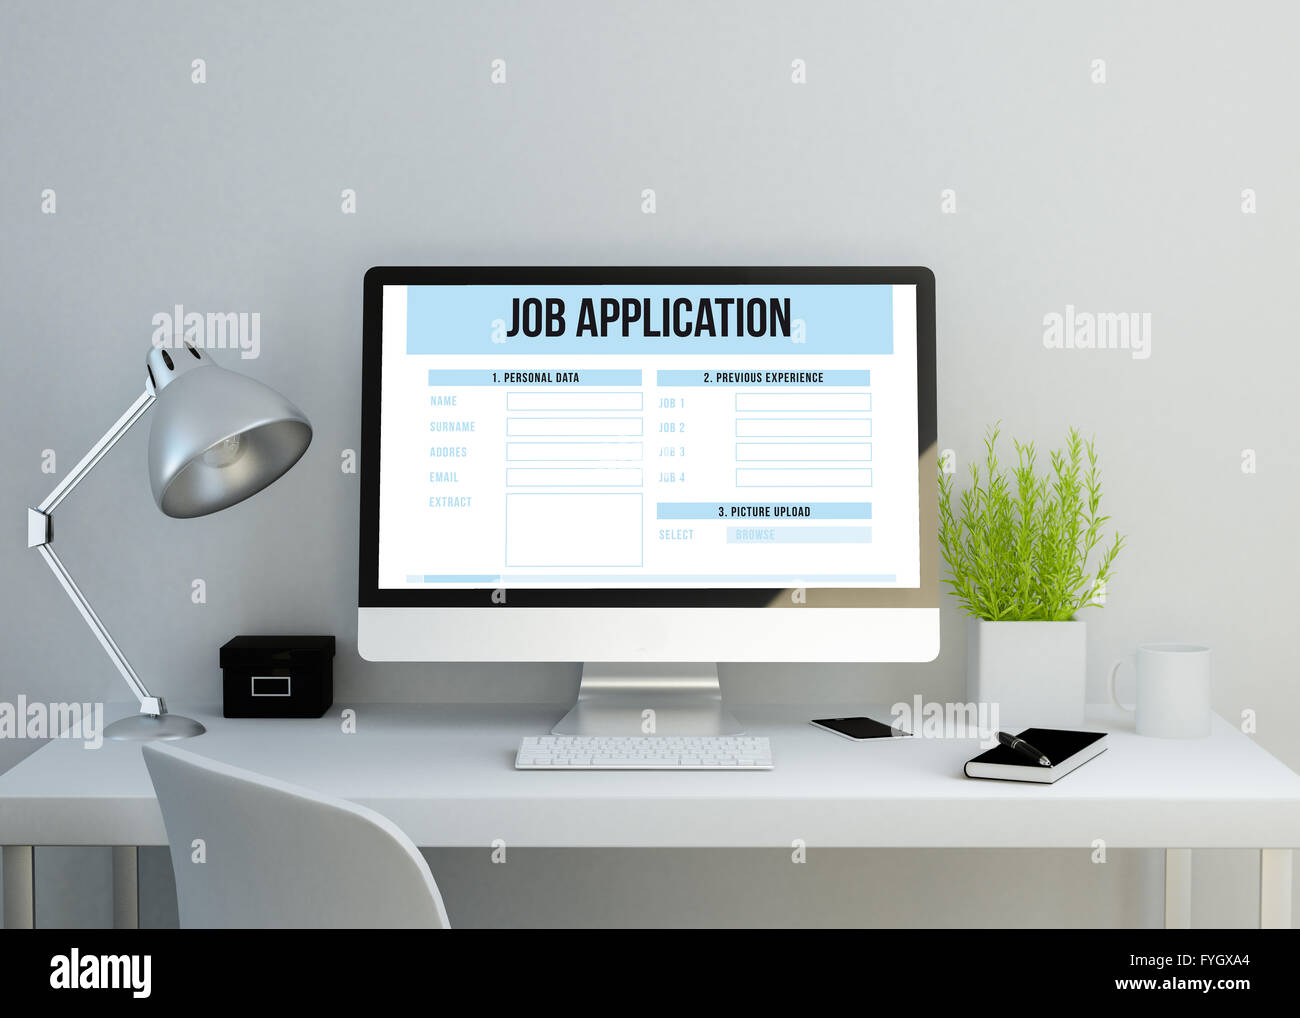 modern clean workspace showing job application. 3D illustration. all screen graphics are made up. Stock Photo